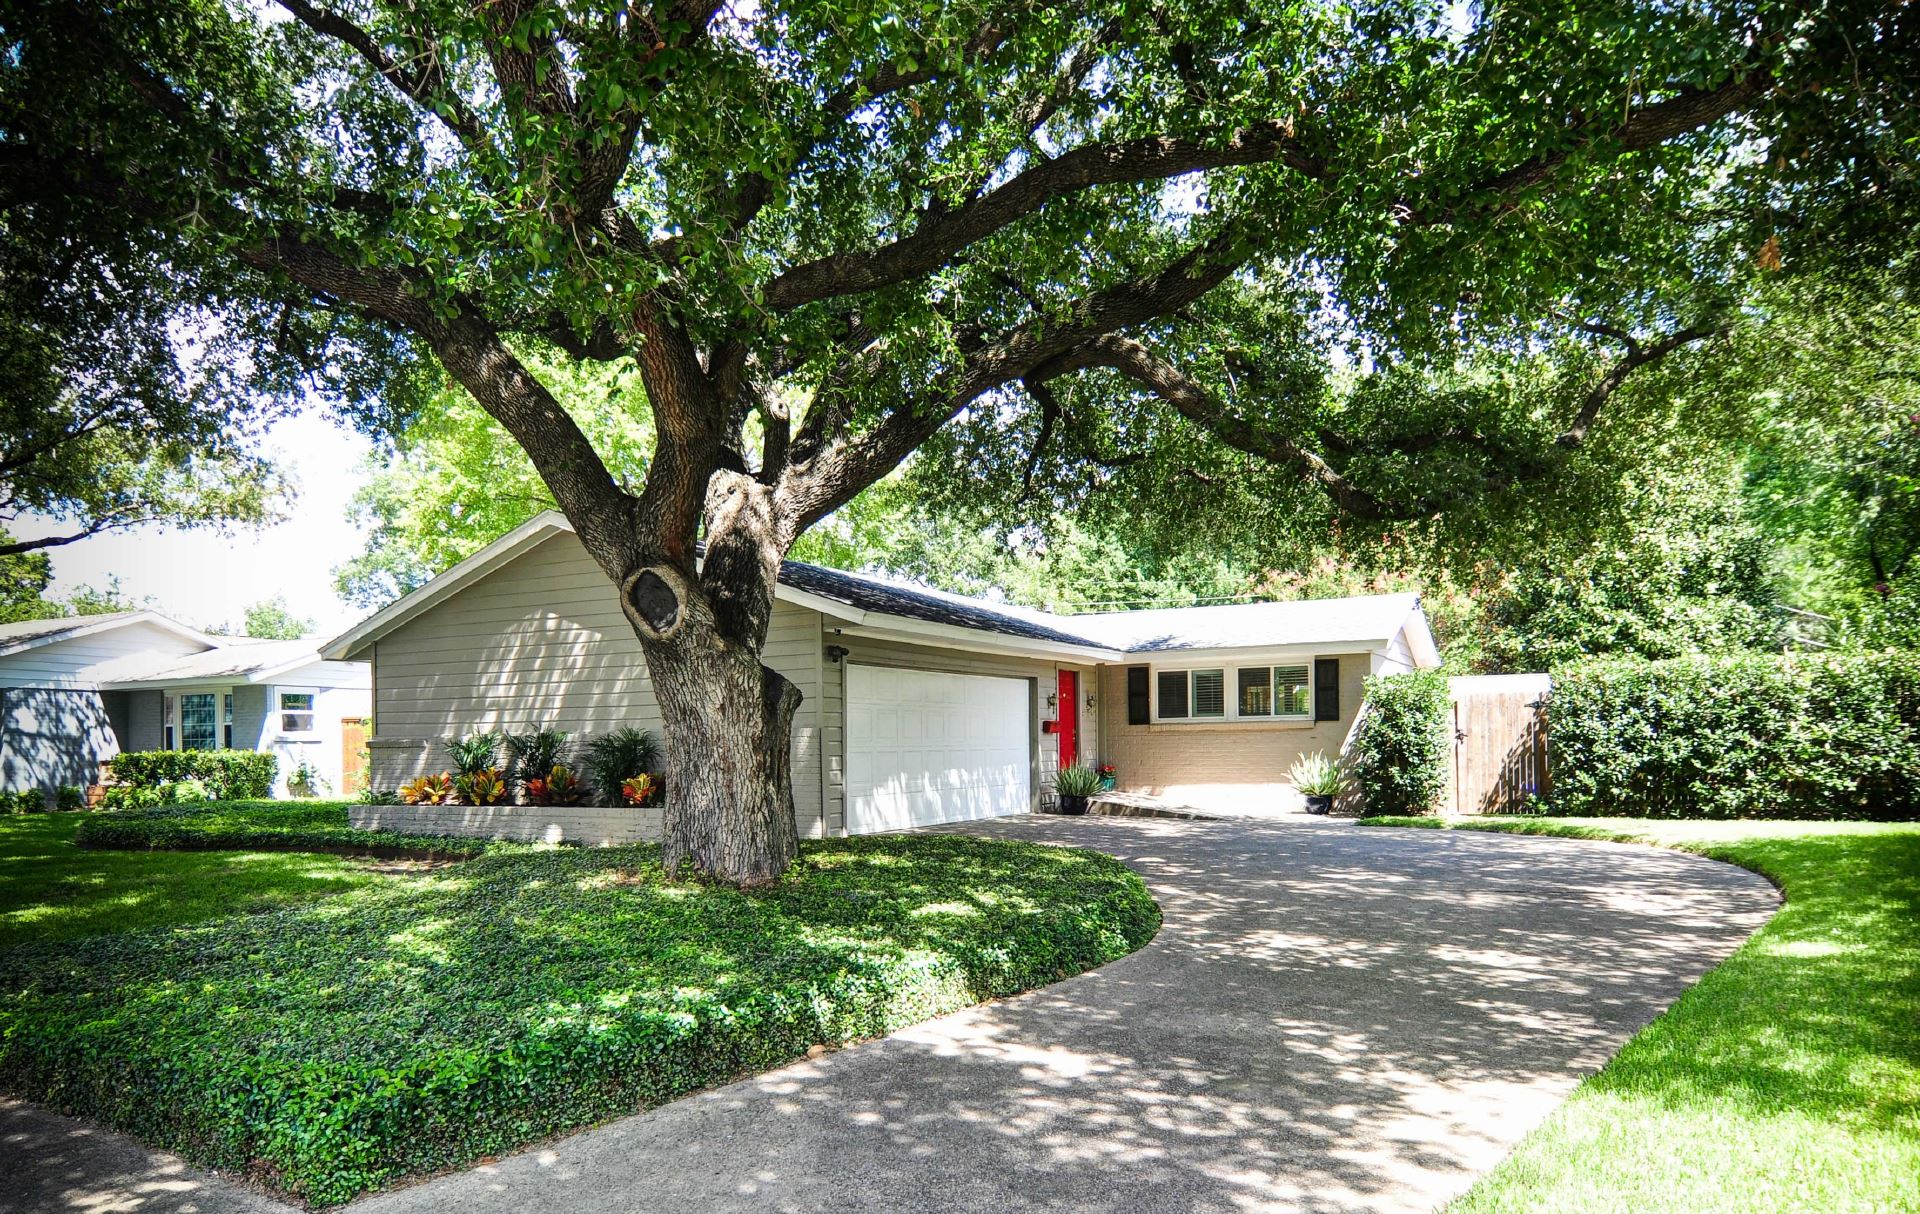  Beautiful Mid-Century home in desirable Timberbrook with lots of mature trees 